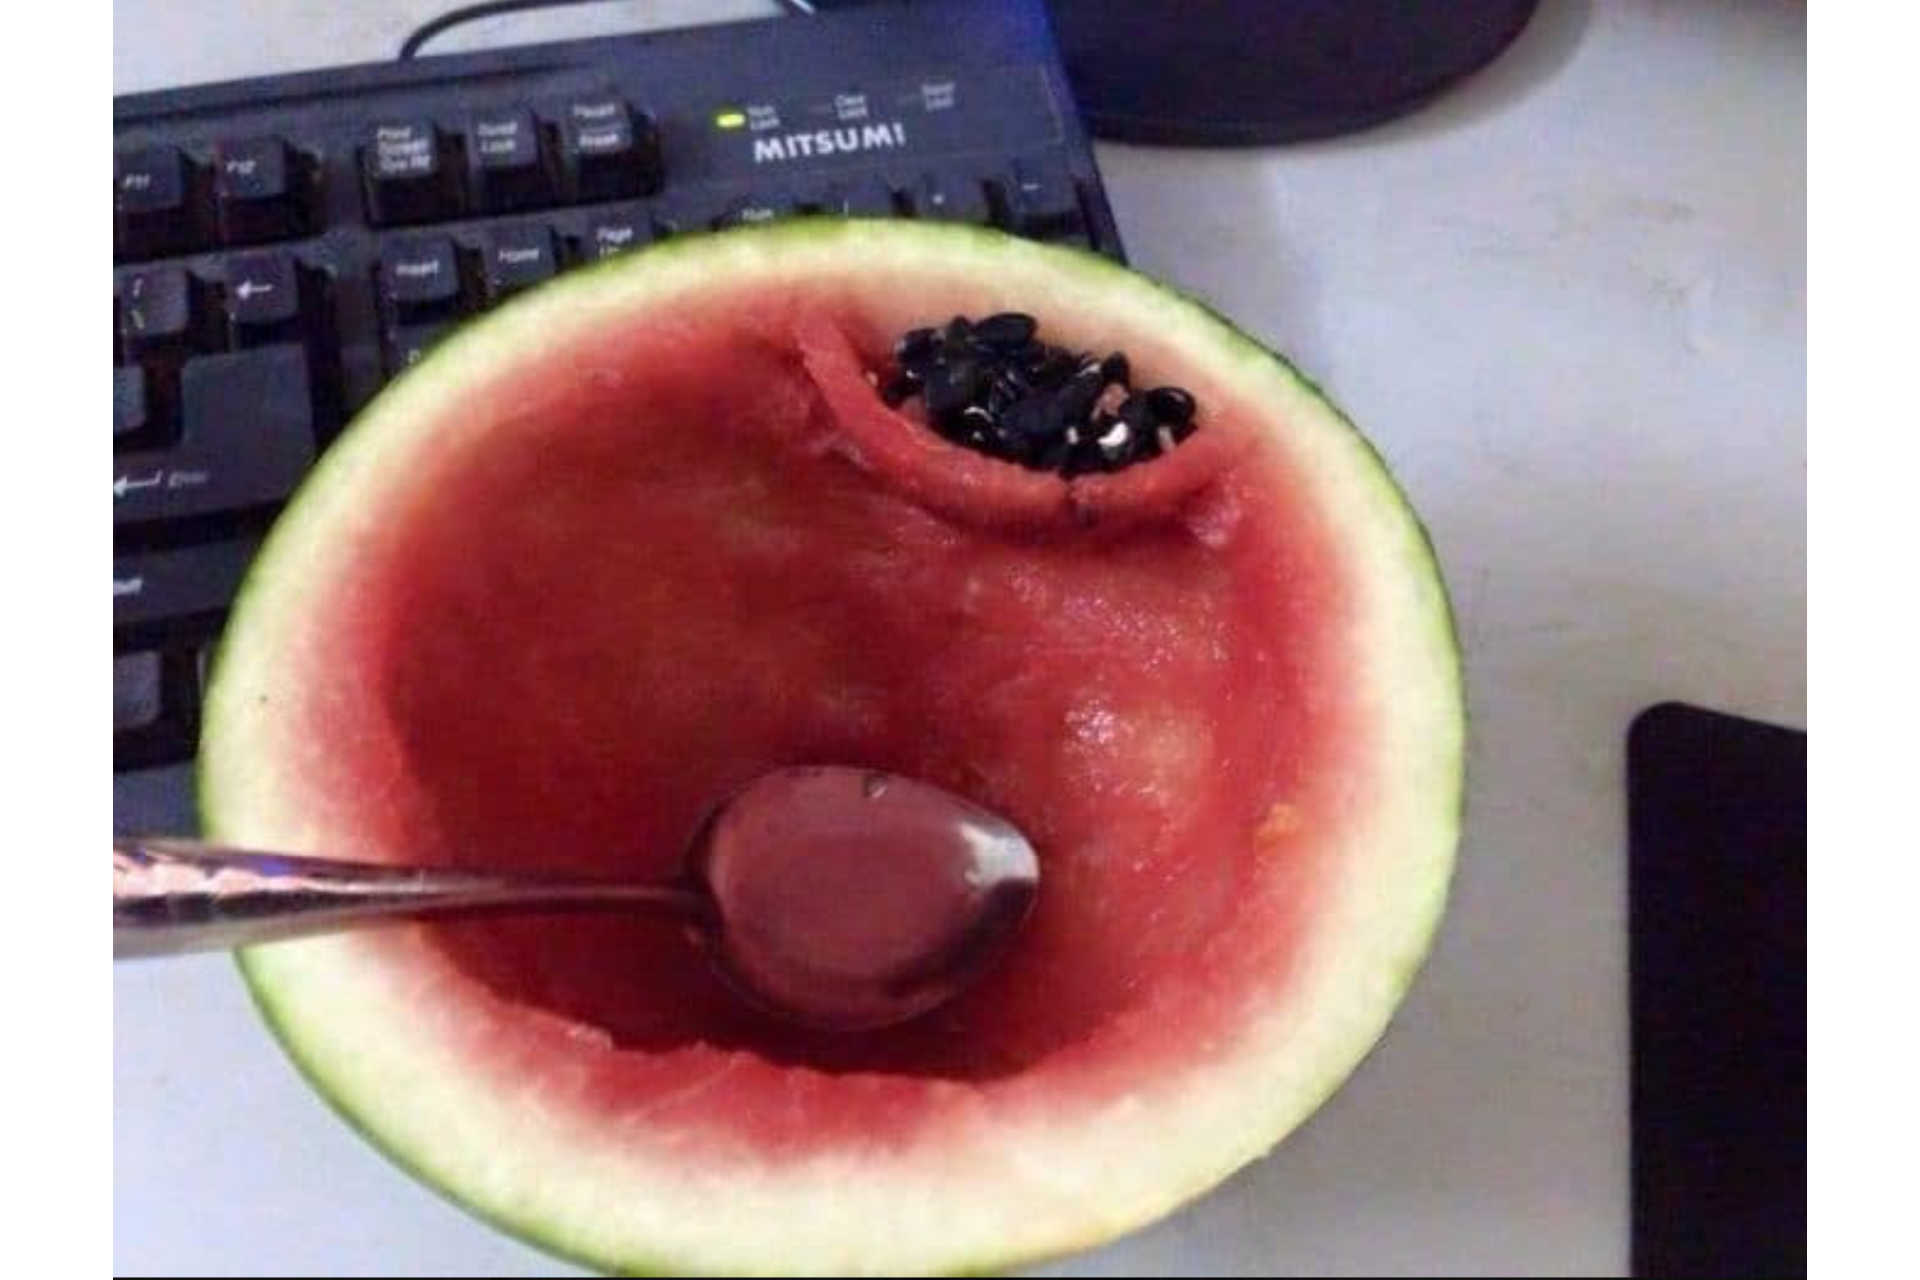 A great day for eating watermelon